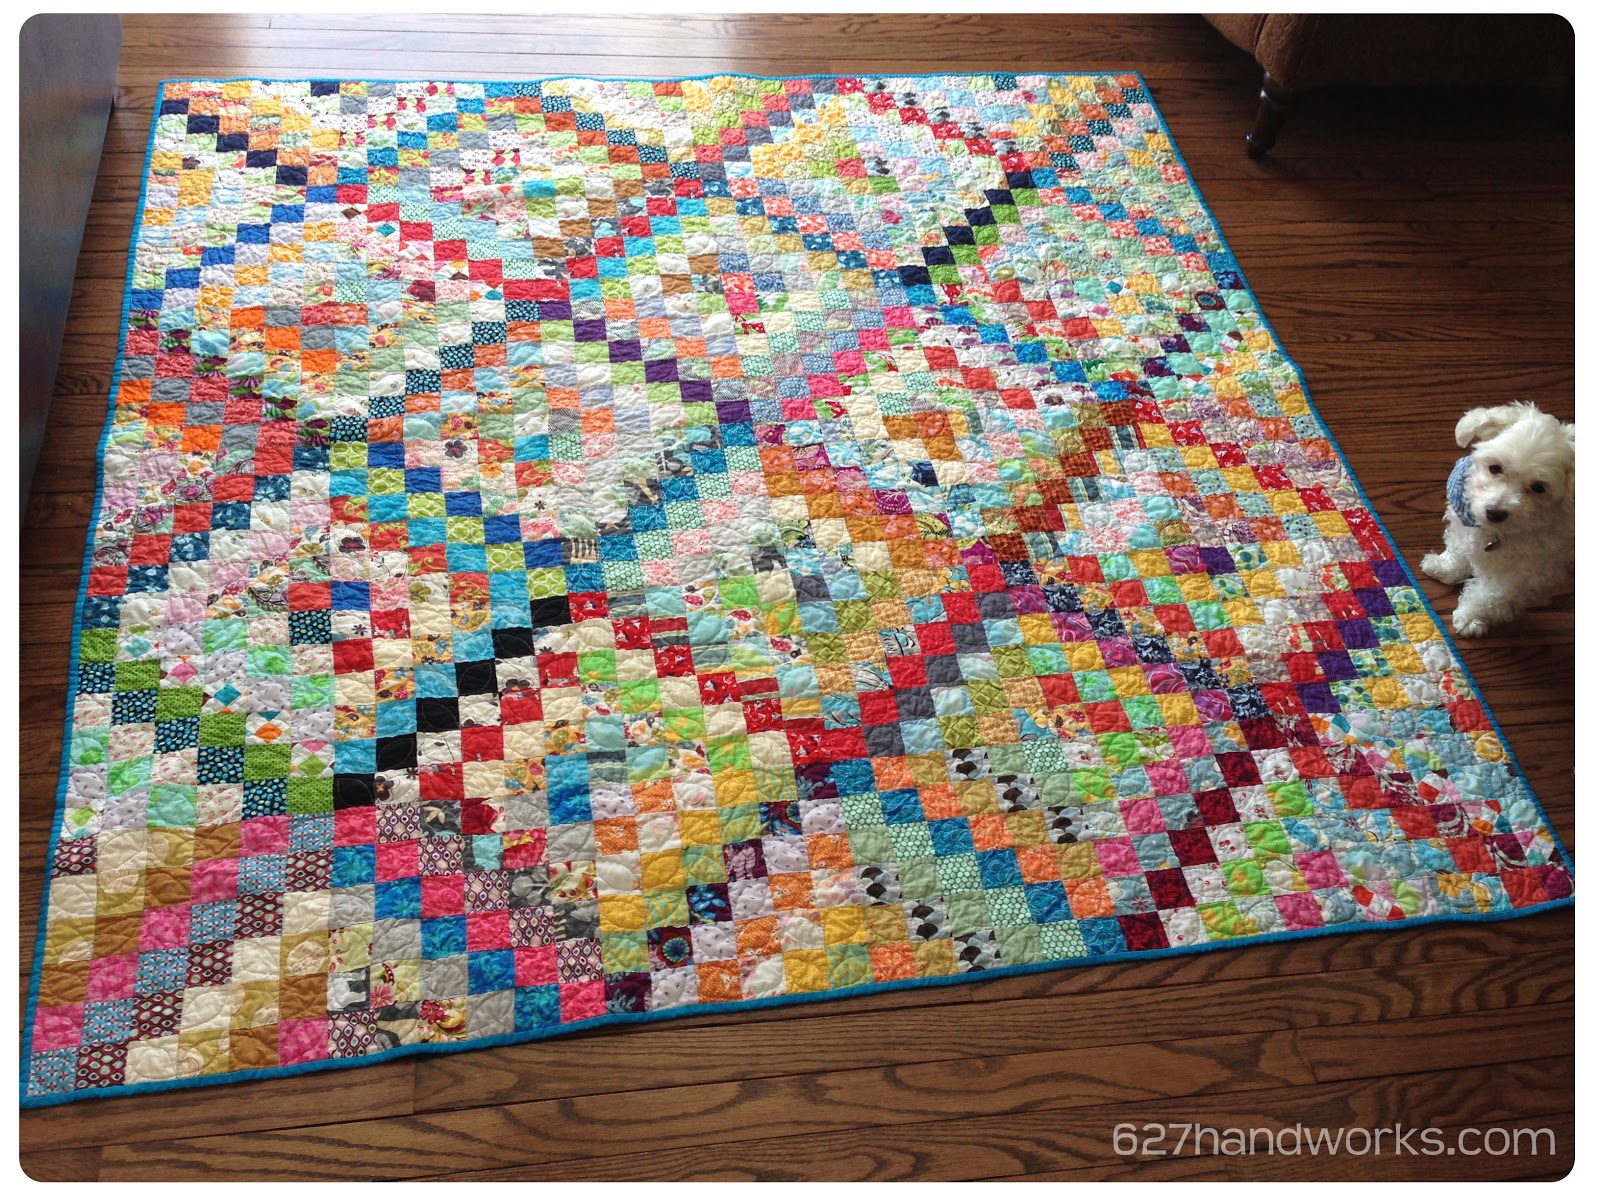 Funoldhag: Almost There - And a Quilt That has me Thinking